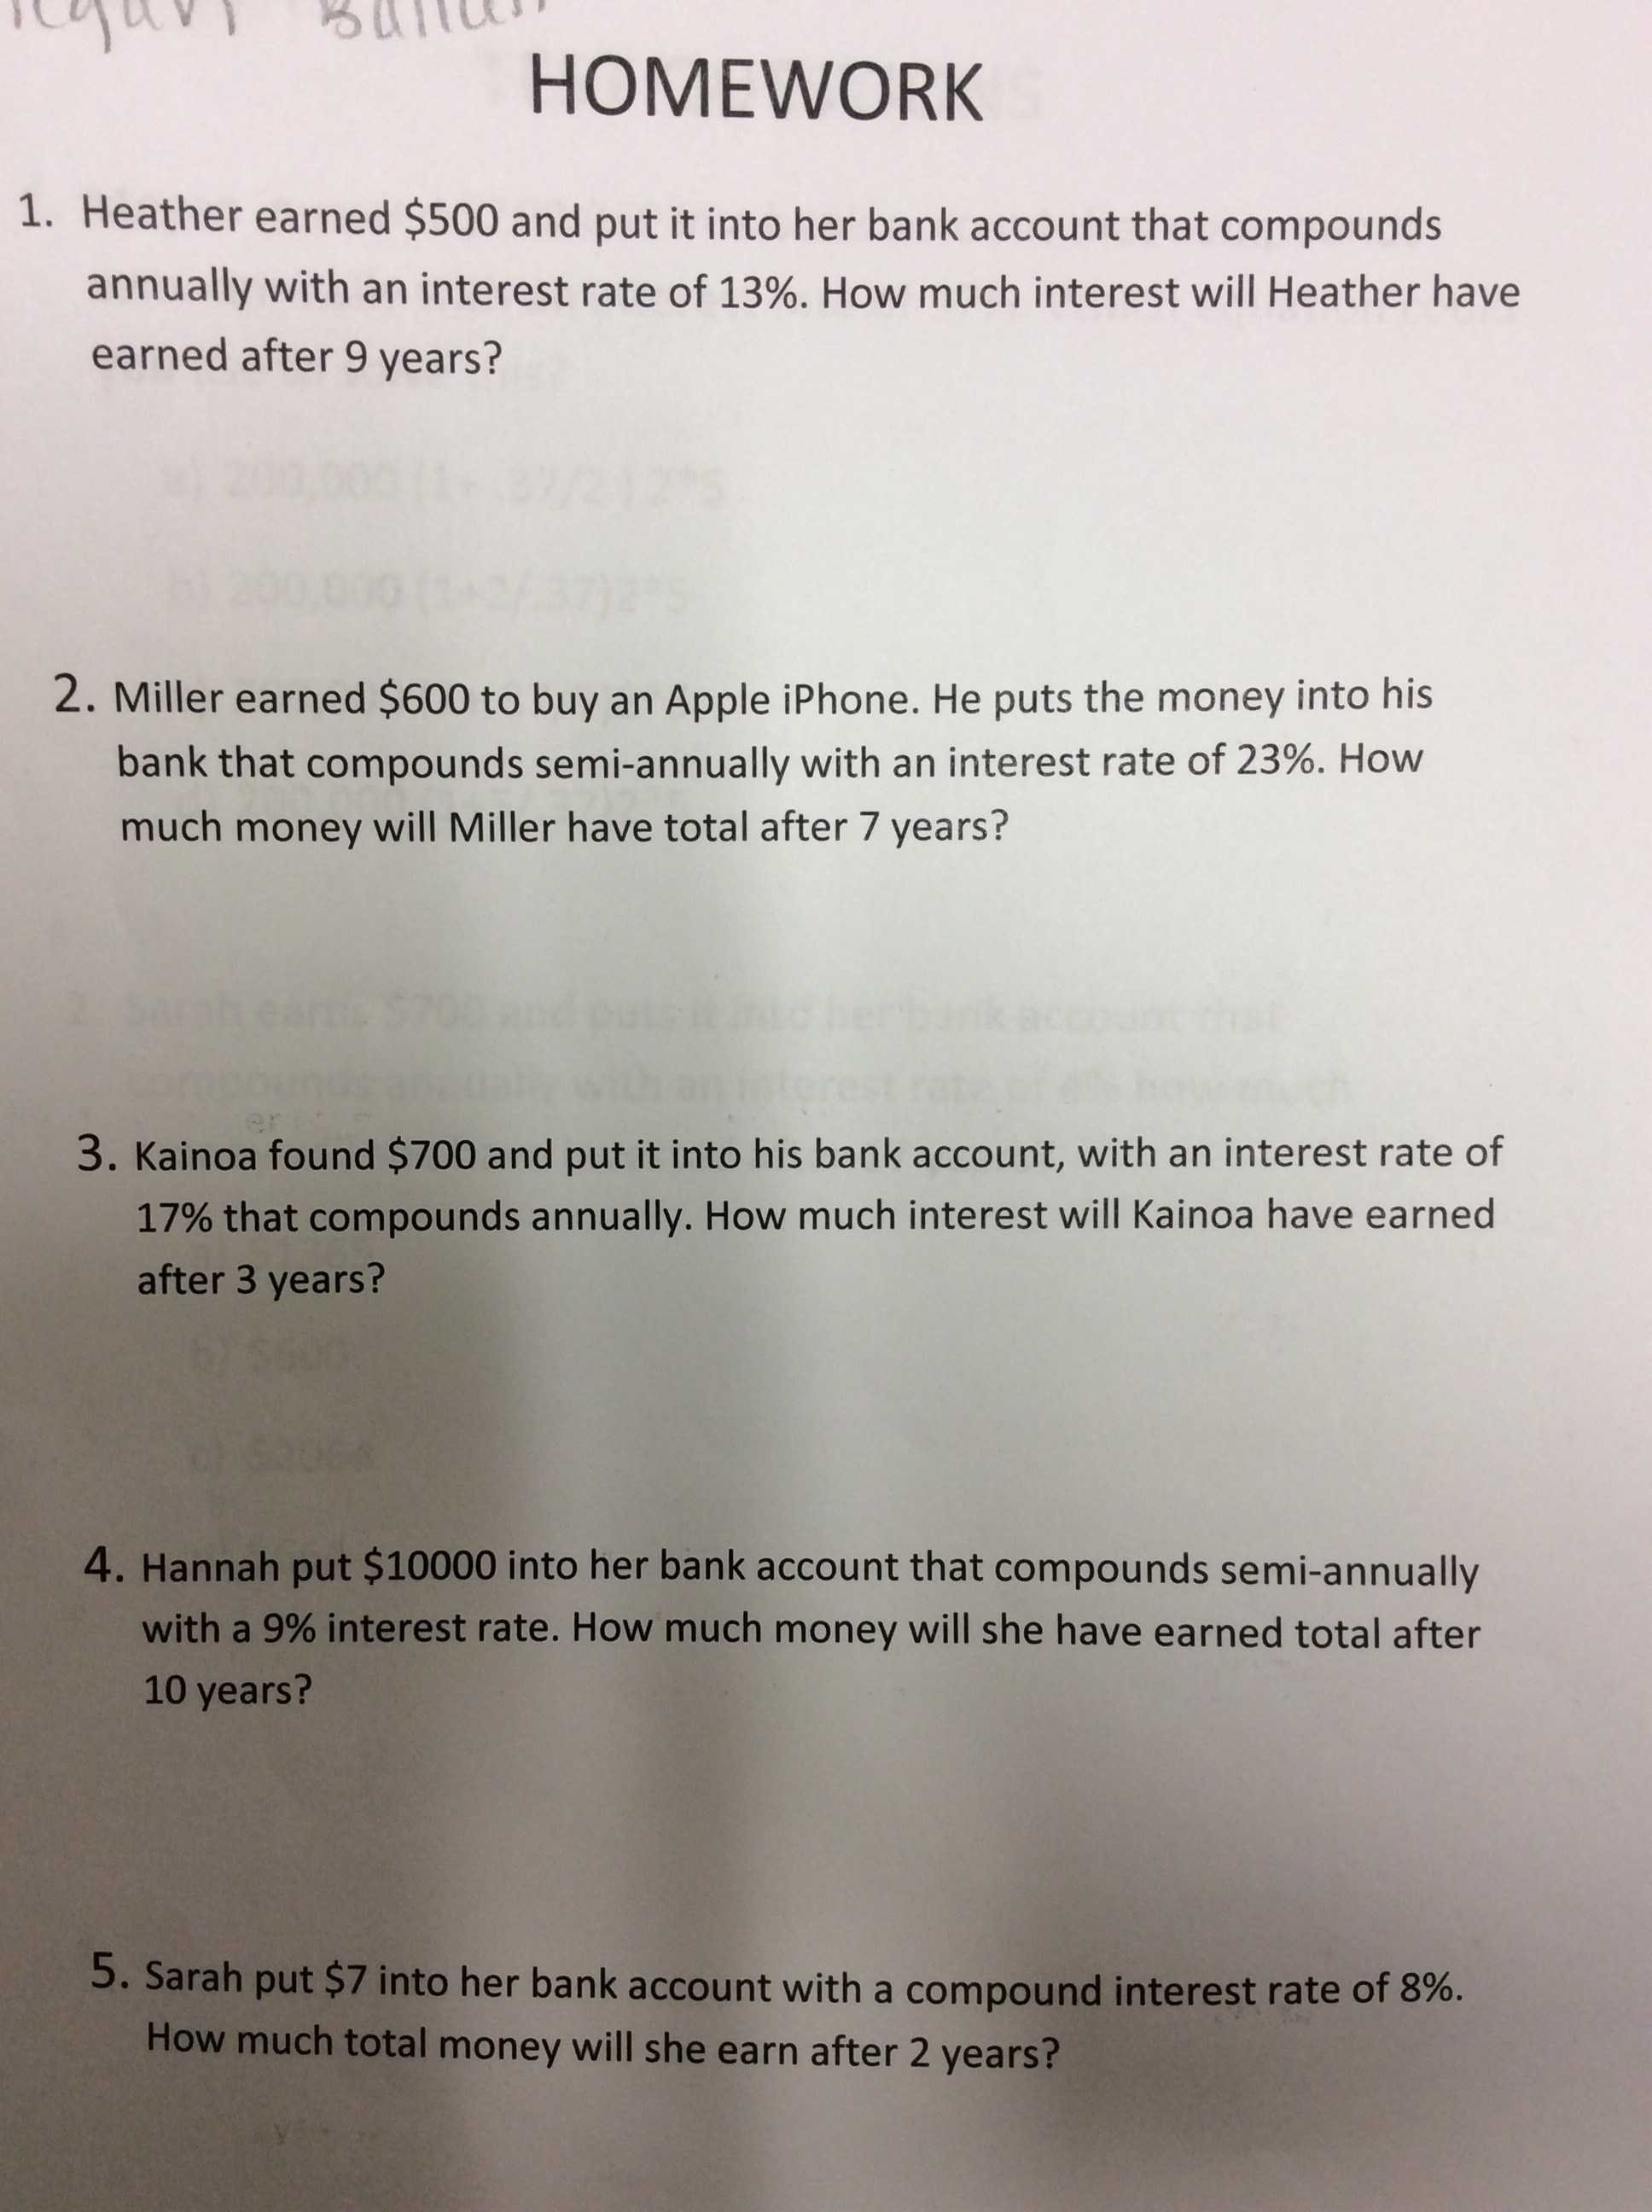 Simple and Compound Interest Practice Worksheet Answer Key Along with Gorzycki Middle School